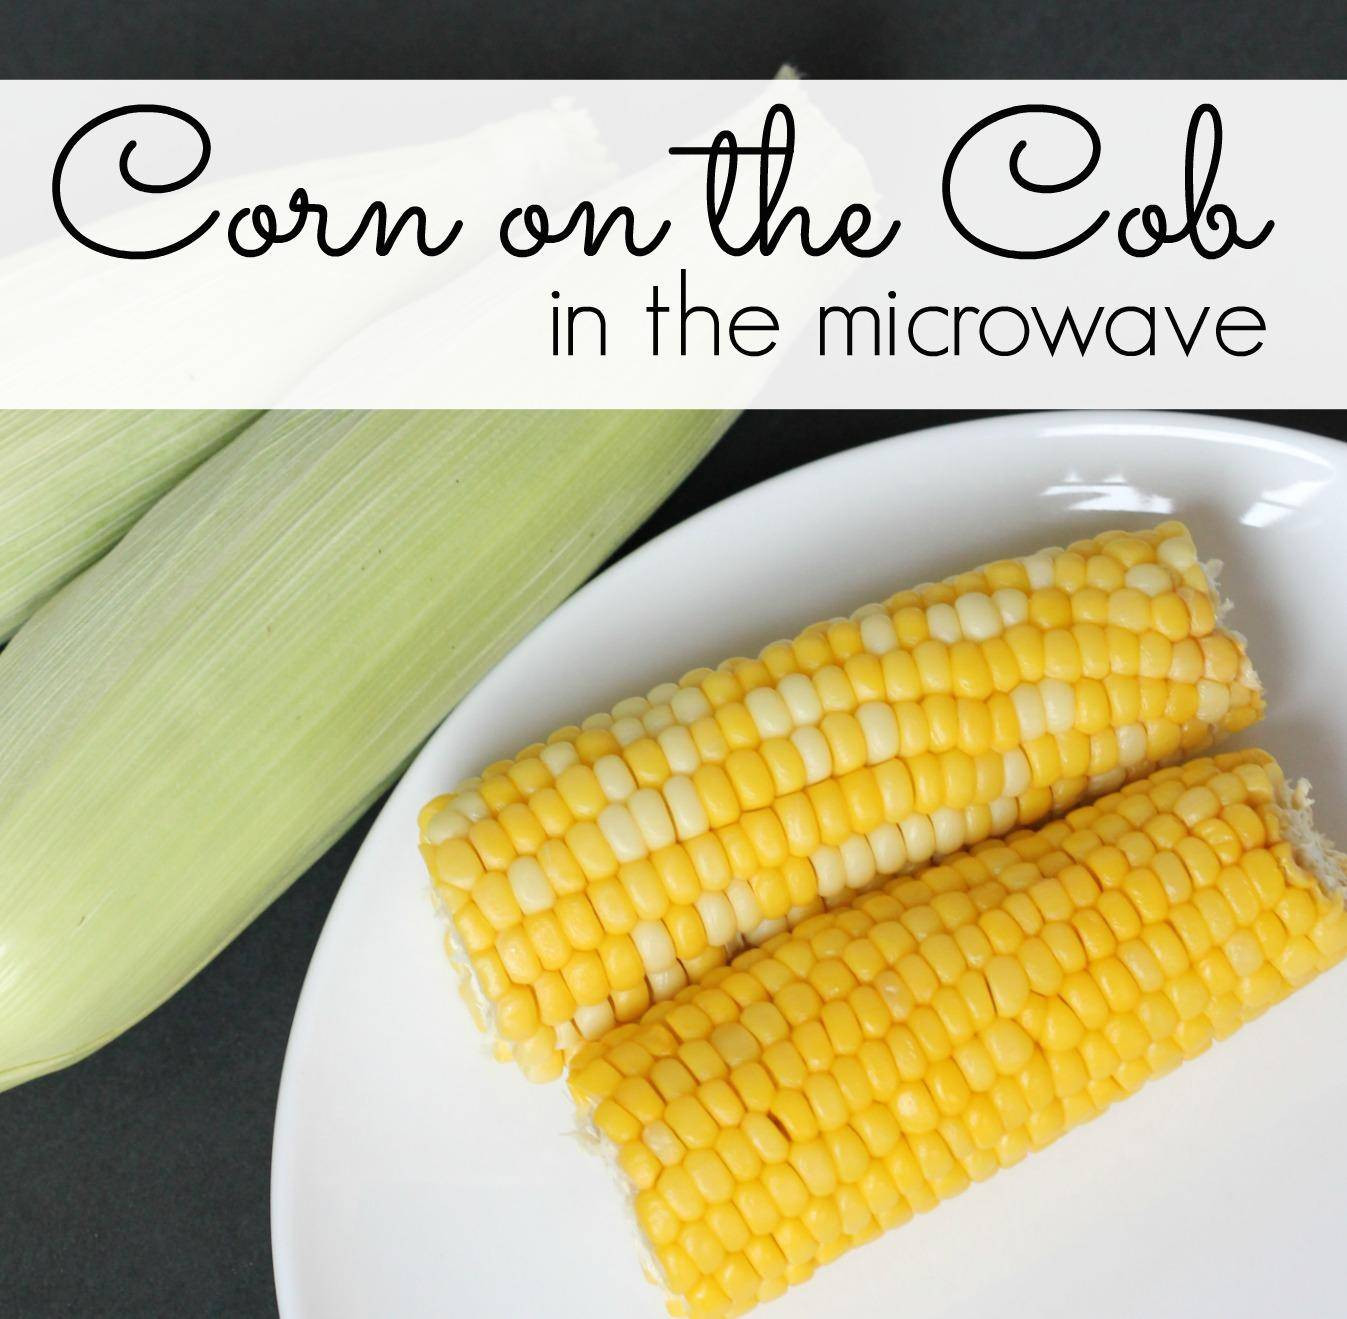 Corn On The Cob In Microwave
 How to Cook Corn on the Cob in the Microwave